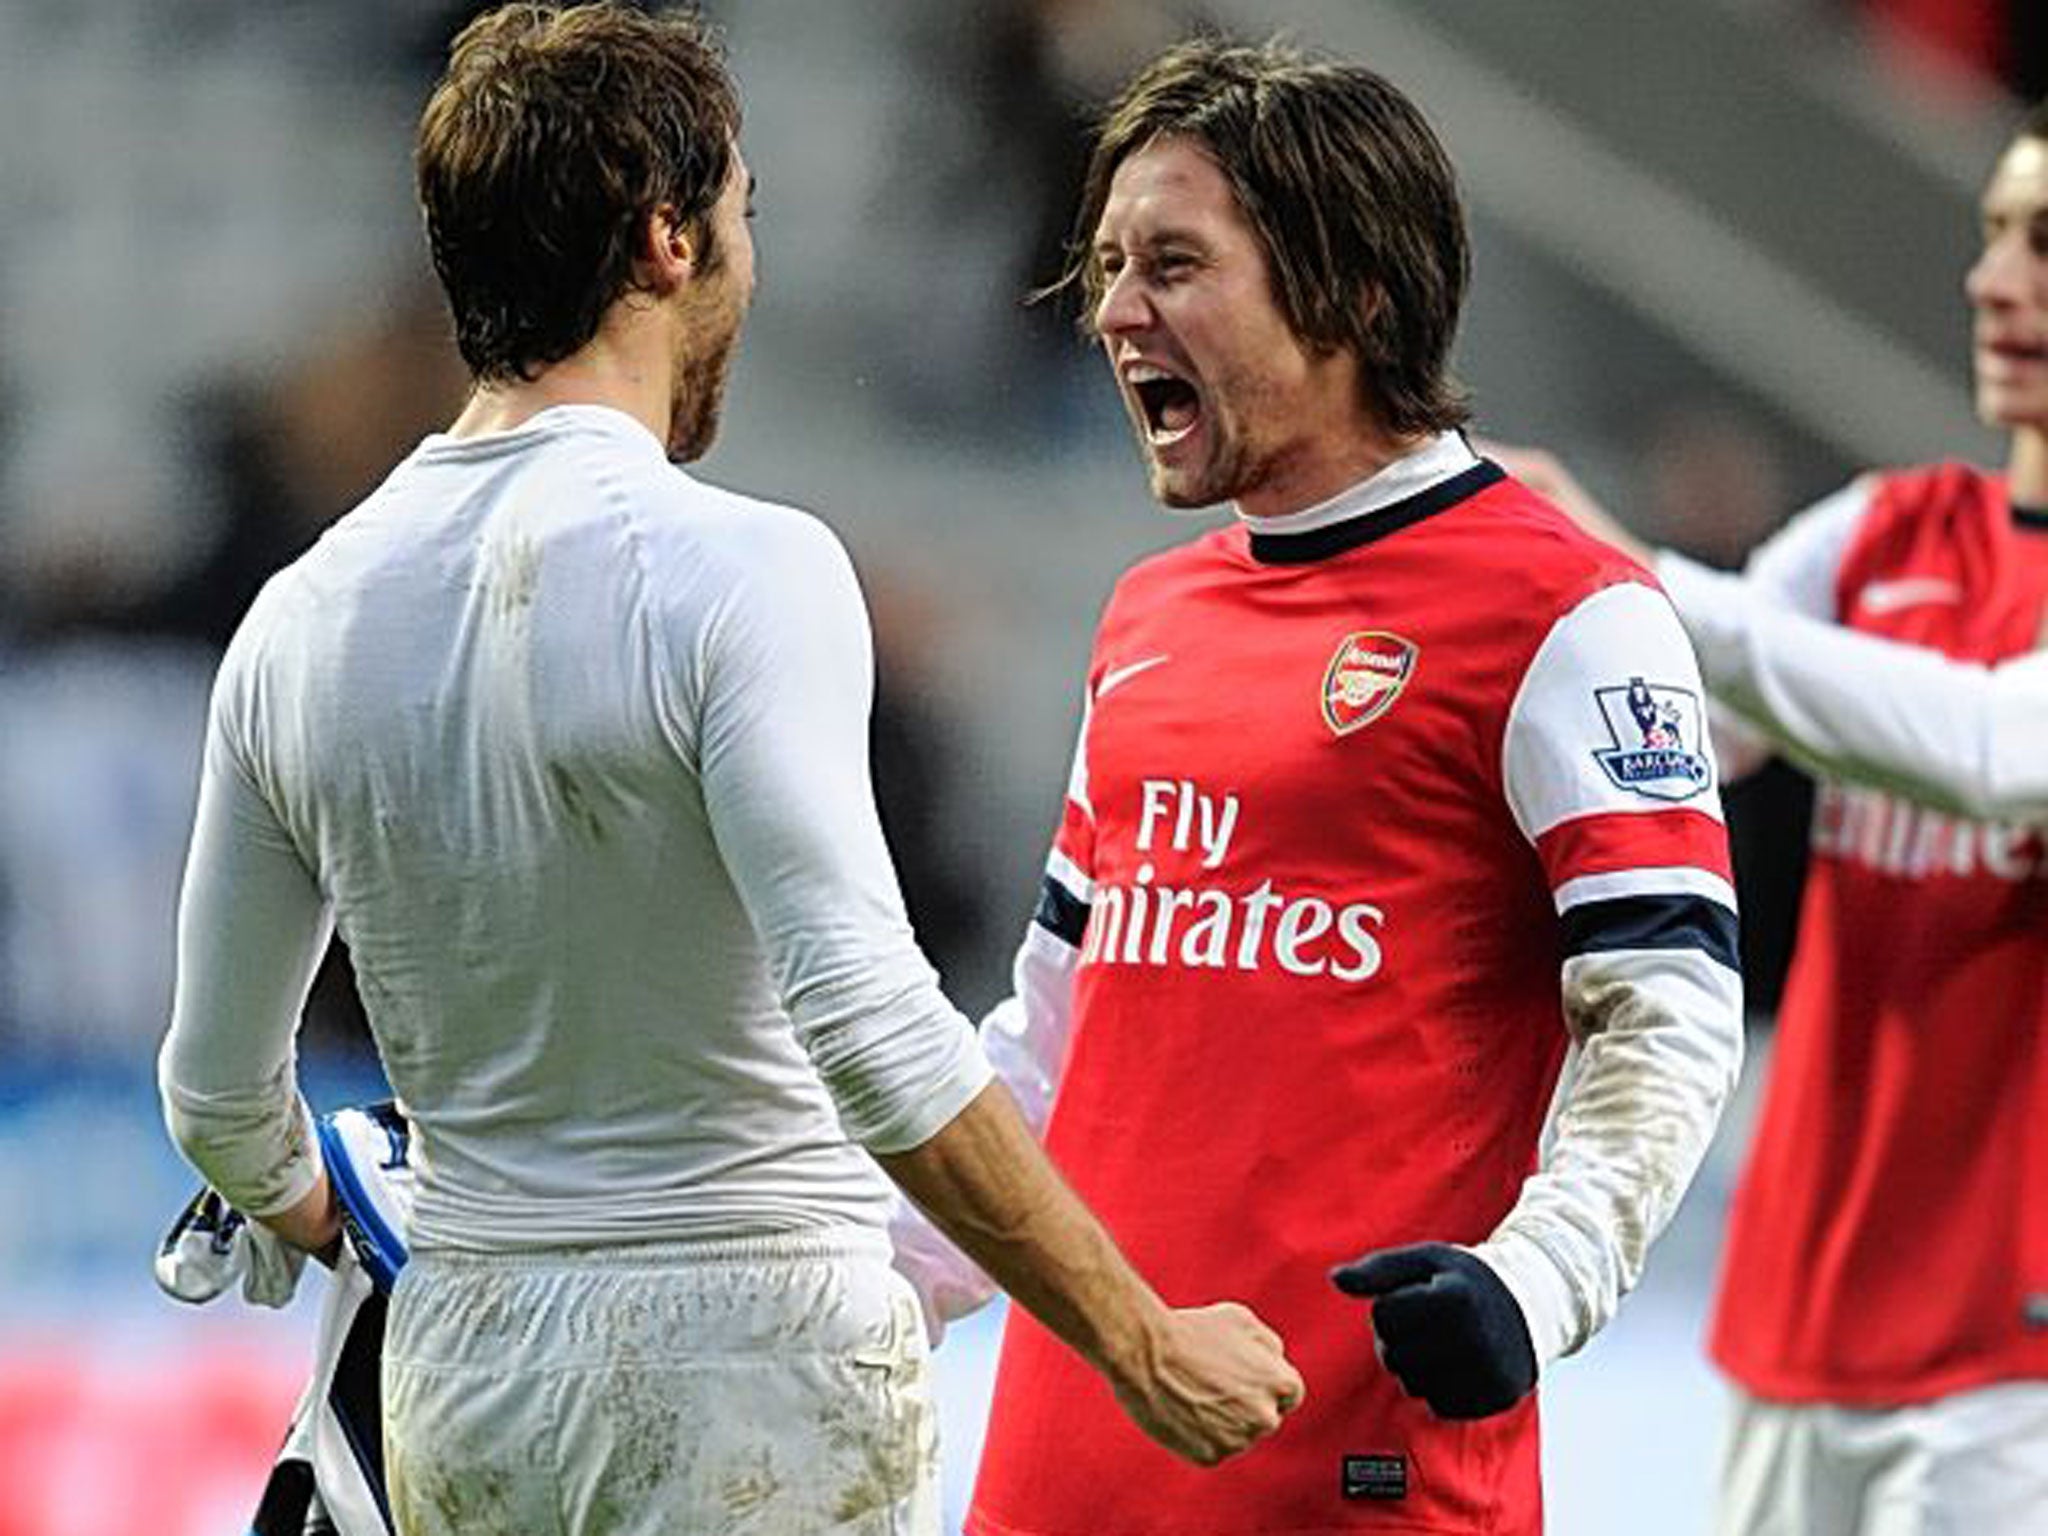 Tomas Rosicky (right) and Mathieu Flamini celebrate Arsenal's win